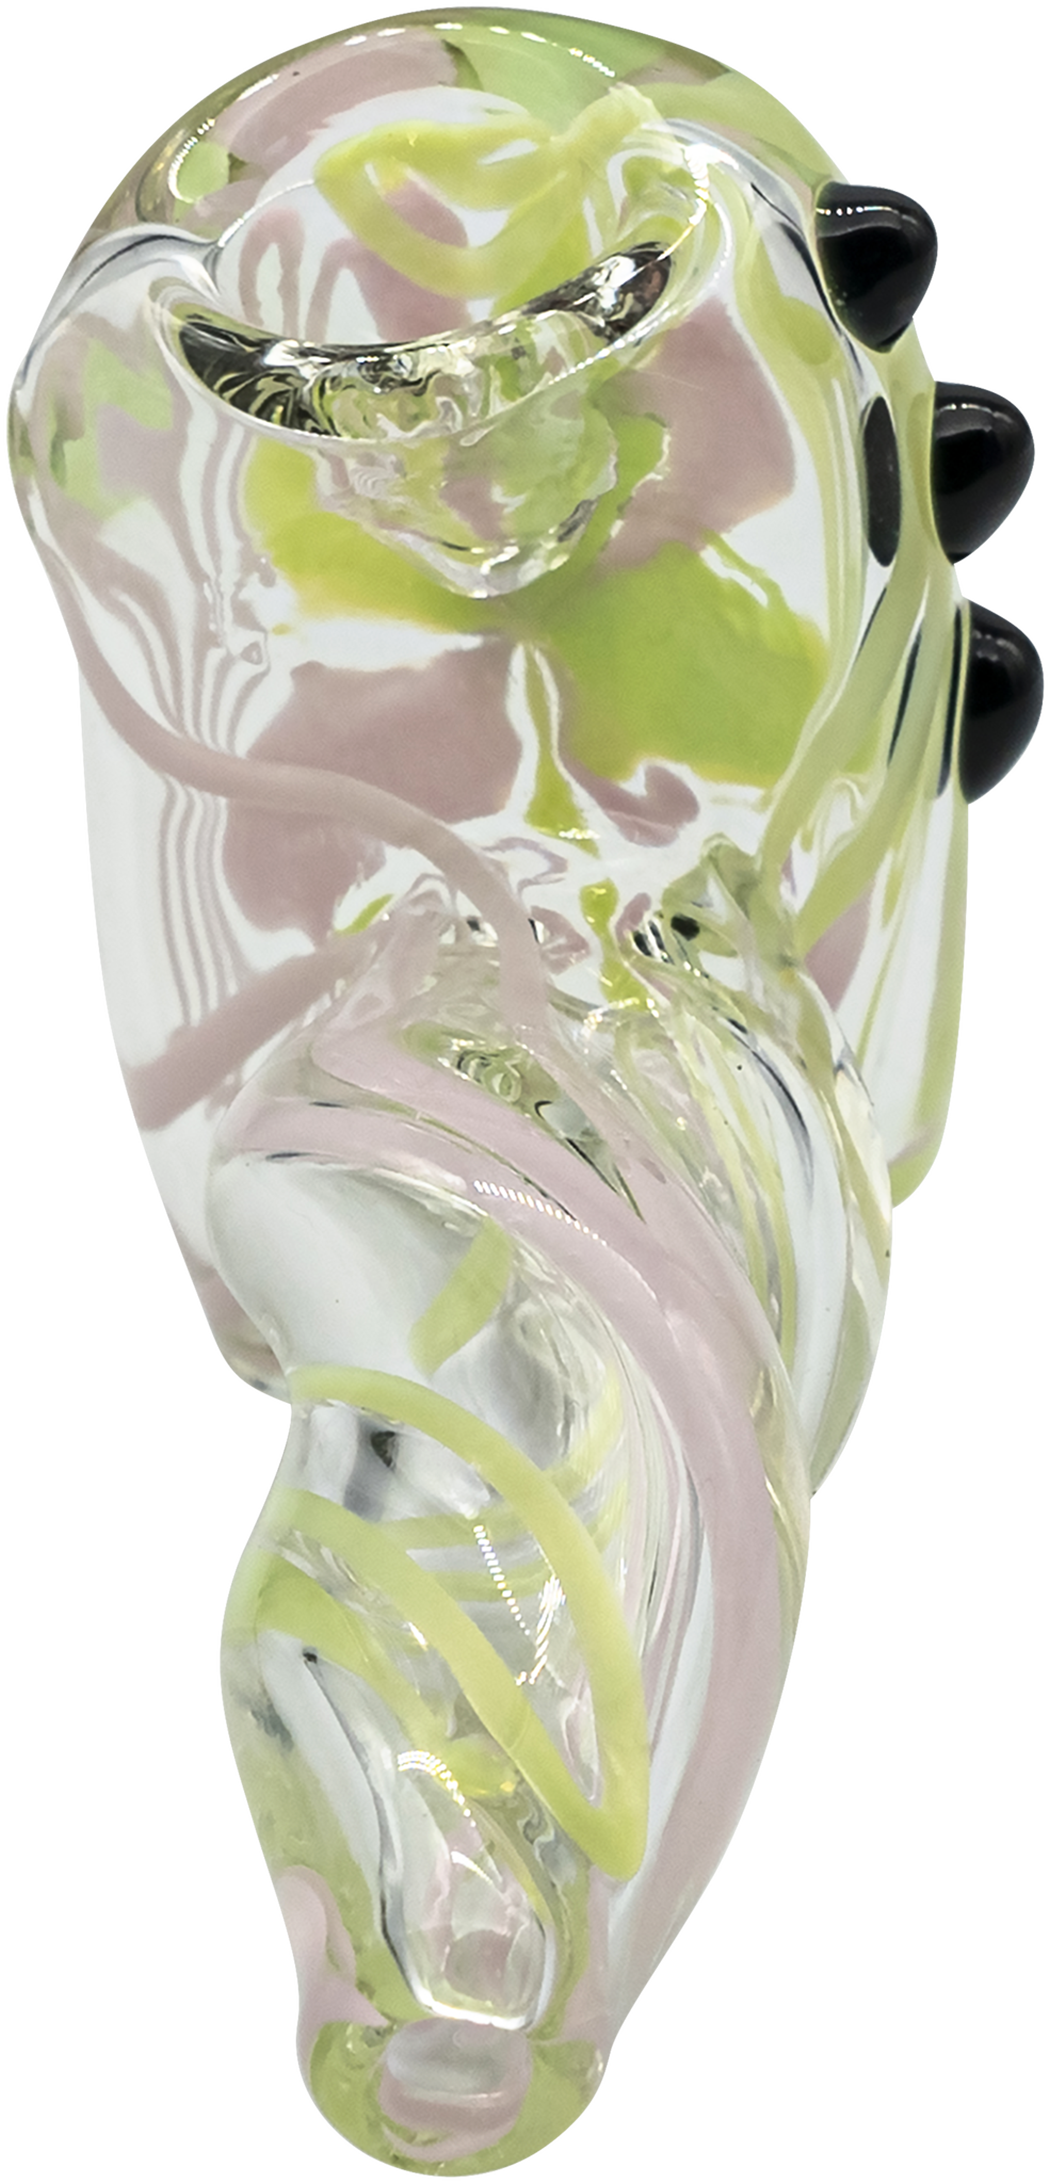 LA Pipes Green Slyme and Bubble Gum Twist Hammer Pipe, 4.5" Borosilicate Glass, USA Made